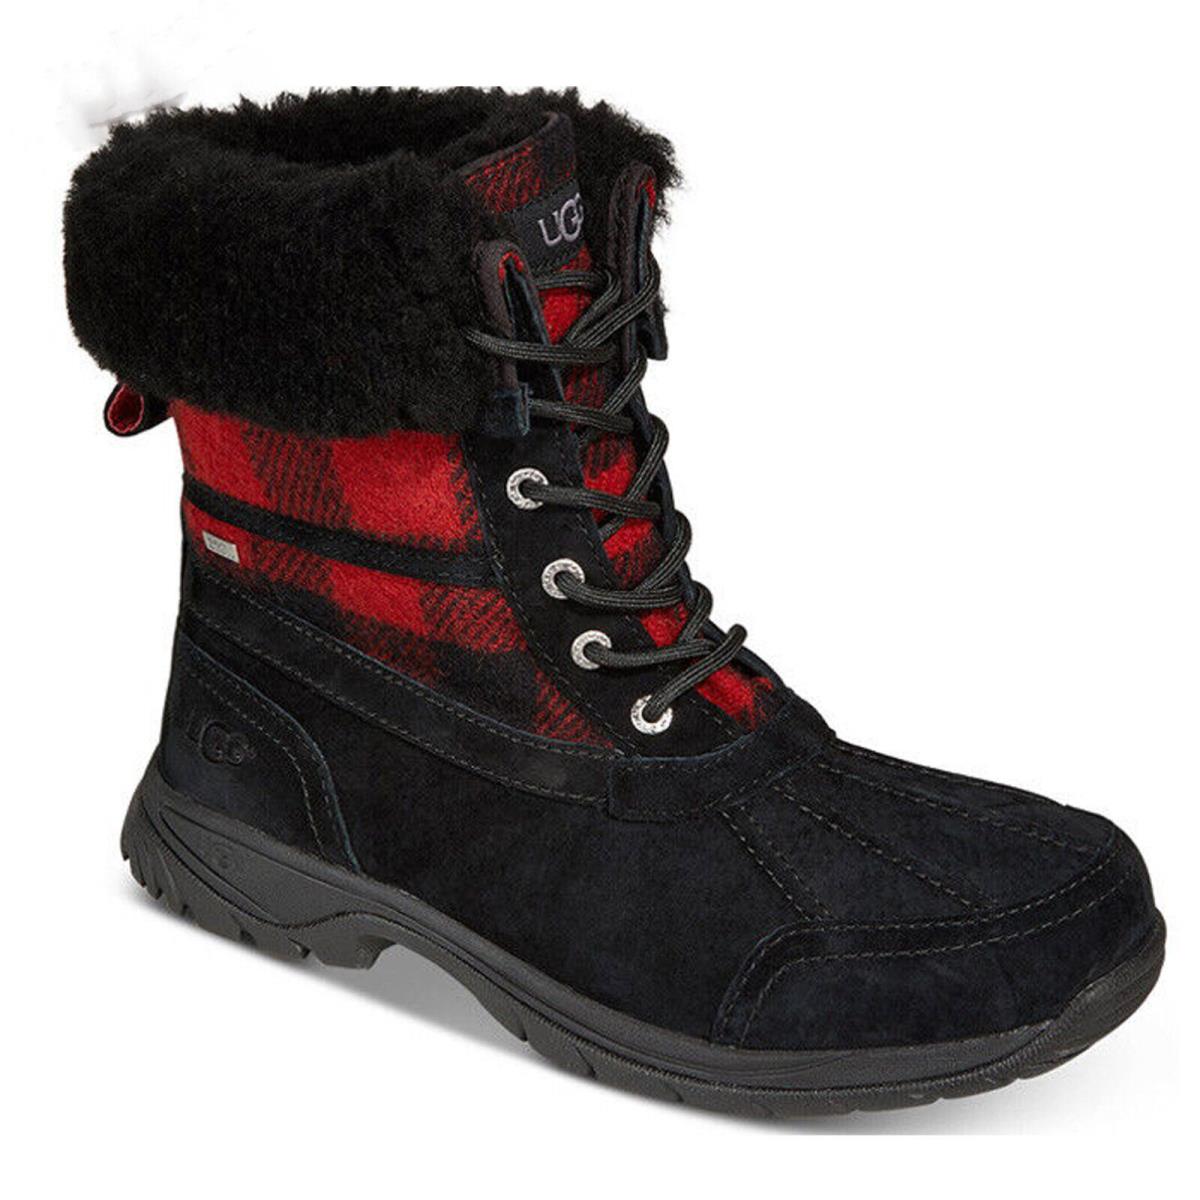 Ugg Australia Mens Butte Lace Up Duck Toe Waterproof Cold Weather Winter Boots